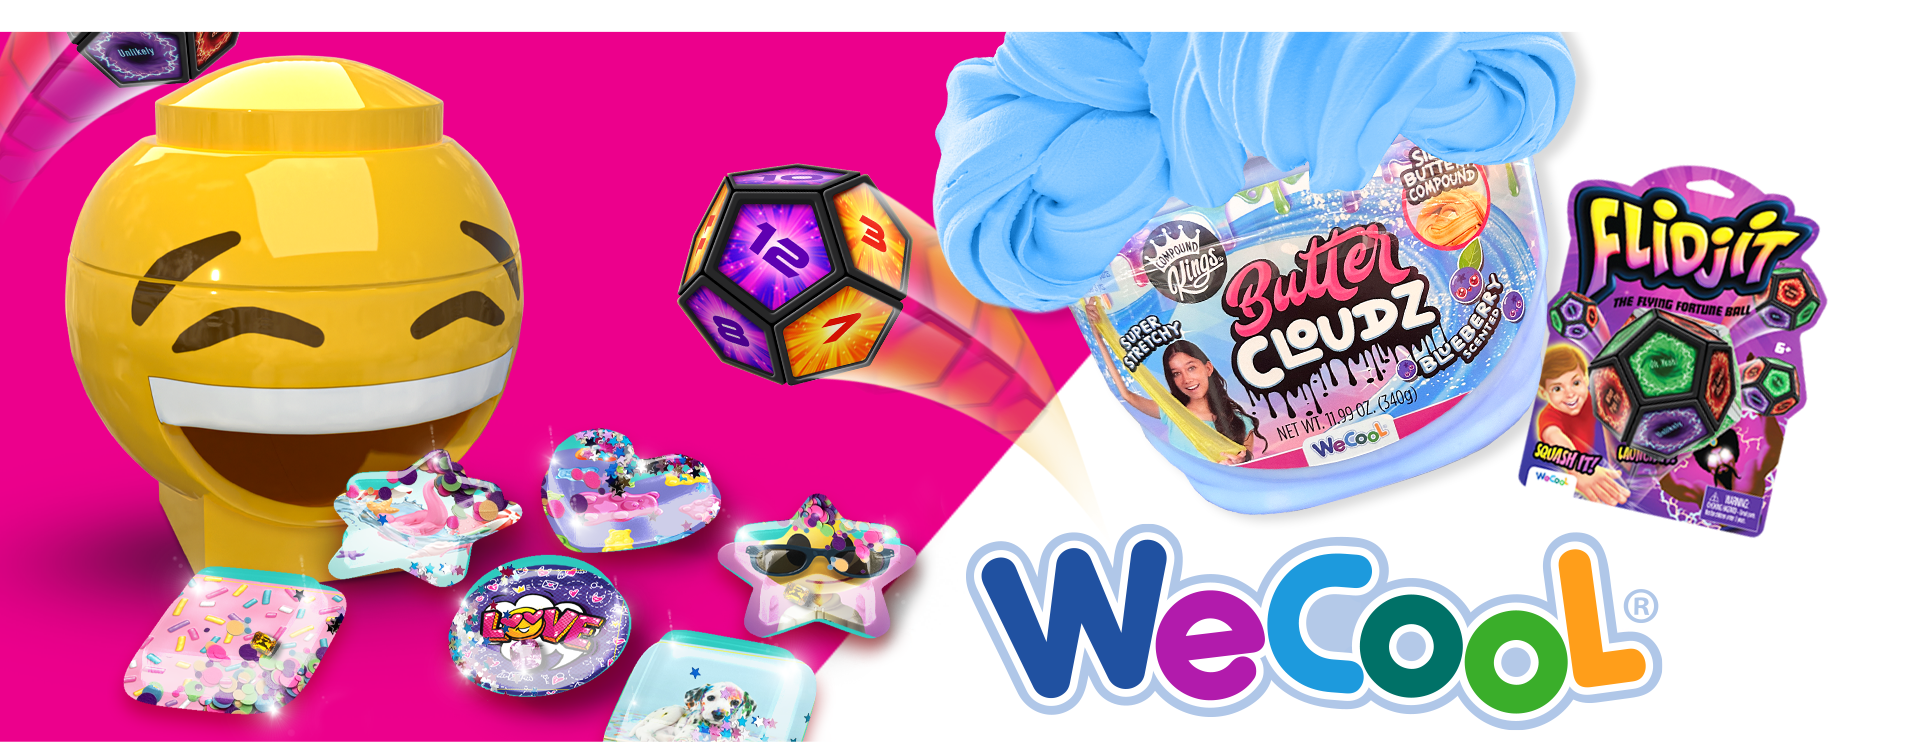 we cool toys products